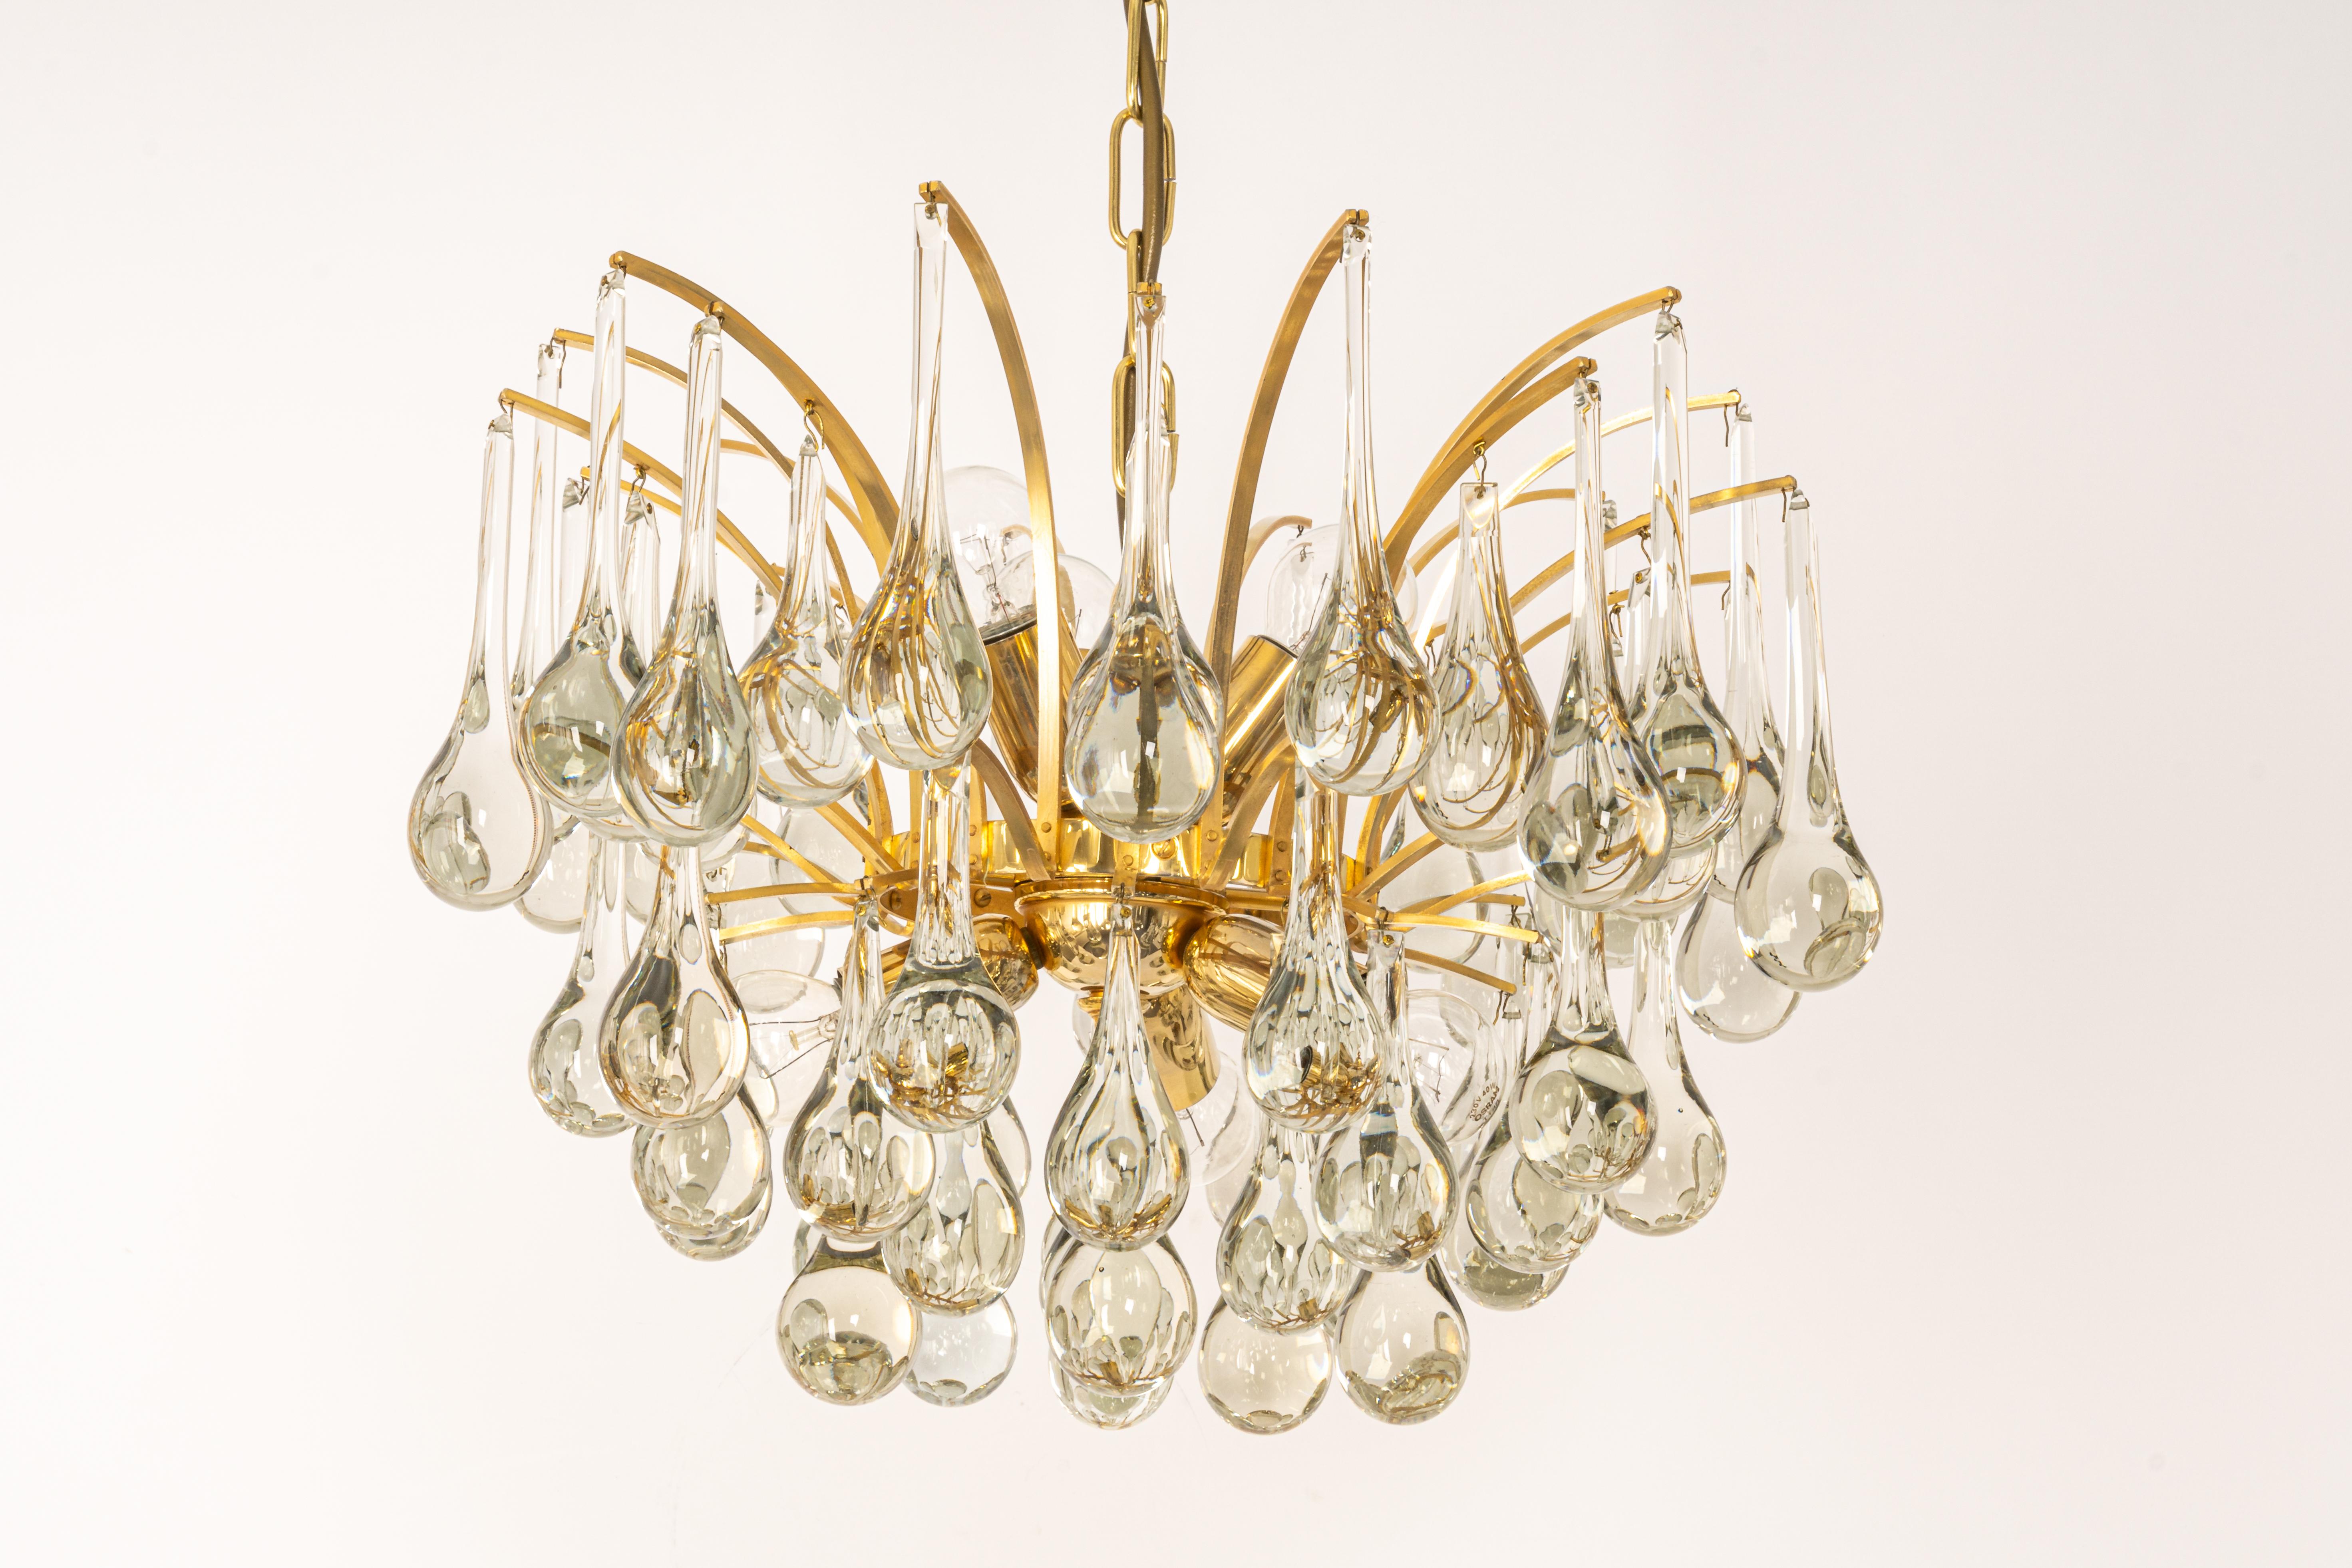 1 of 2 stunning chandelier by Christoph Palme, Germany, manufactured in 1970s. It’s composed of Murano teardrop glass pieces on a gilded brass frame.

High quality and in very good condition. Cleaned, well-wired and ready to use. 

The fixture